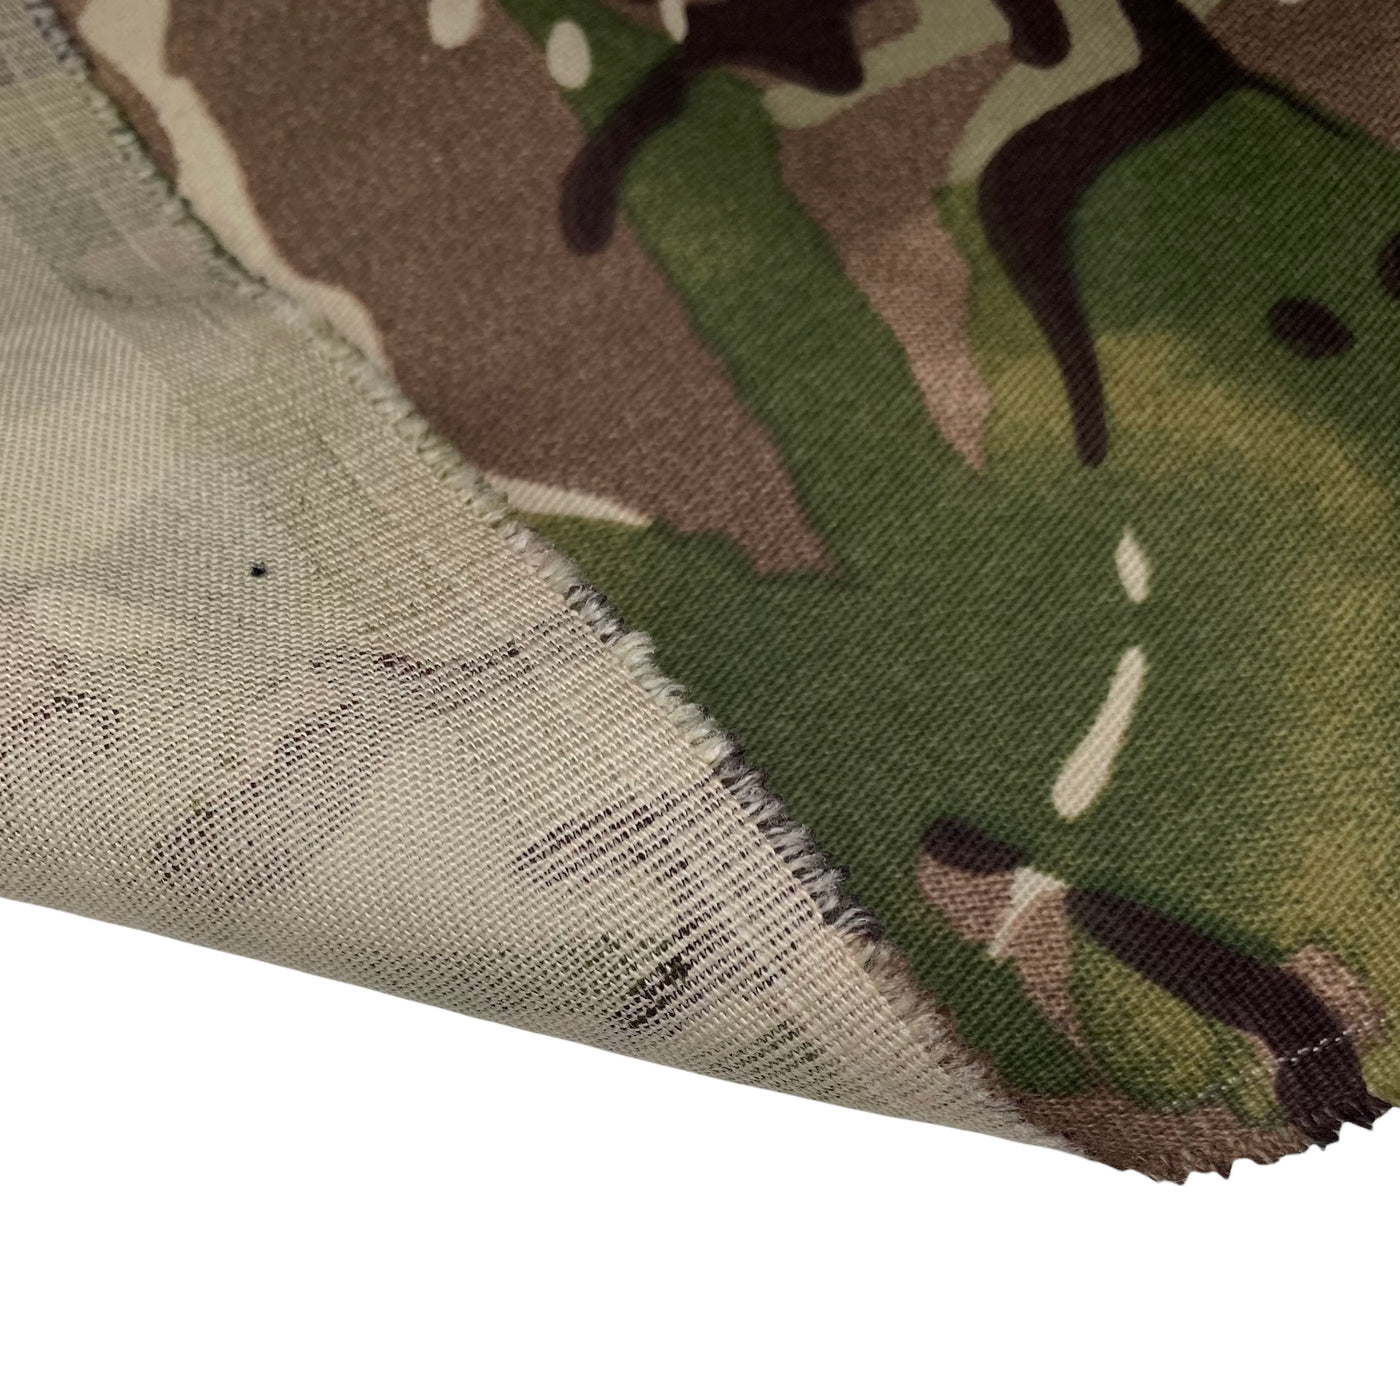 Printed Twill Cotton Canvas - Camouflage - 8oz